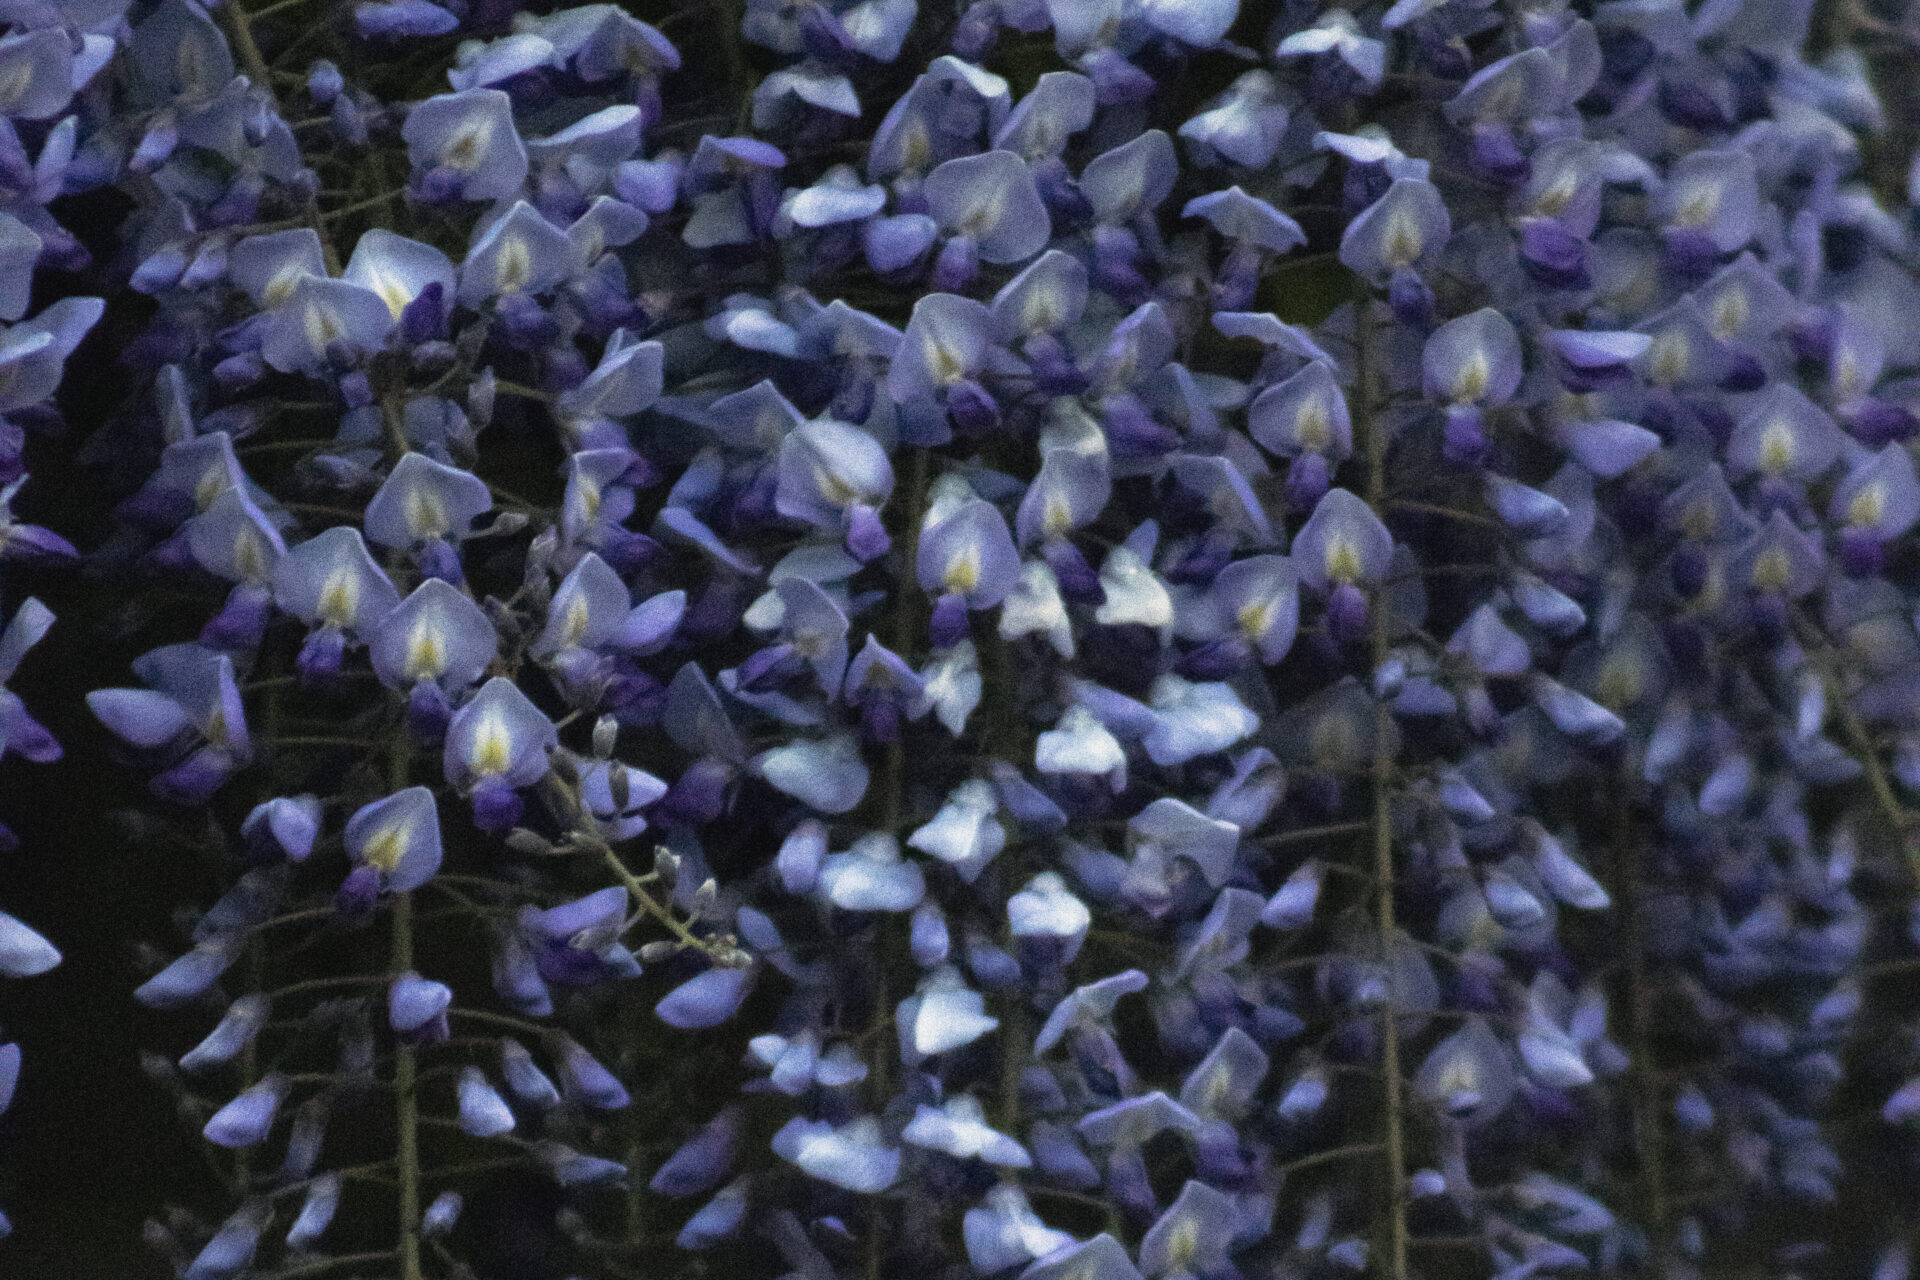 Wisteria Flowers, May 13, 2021